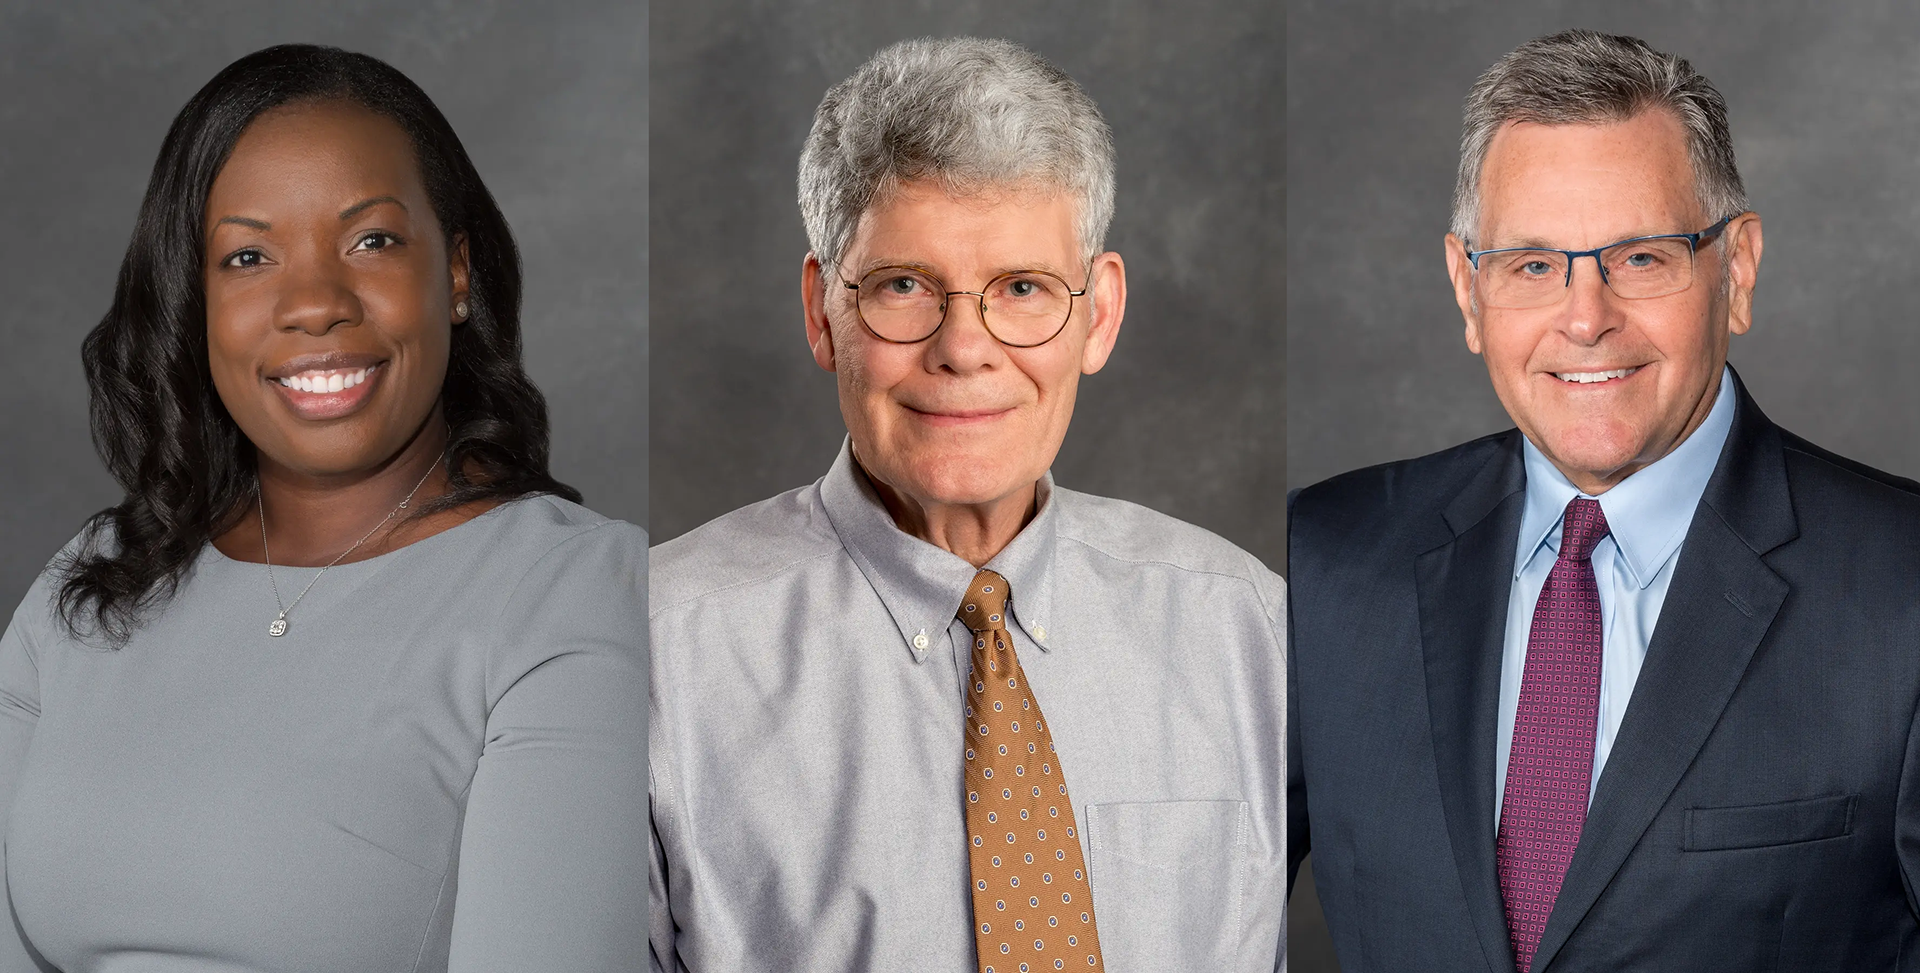 Two current and one former School of Medicine faculty members receive prestigious awards at annual Faculty Convocation